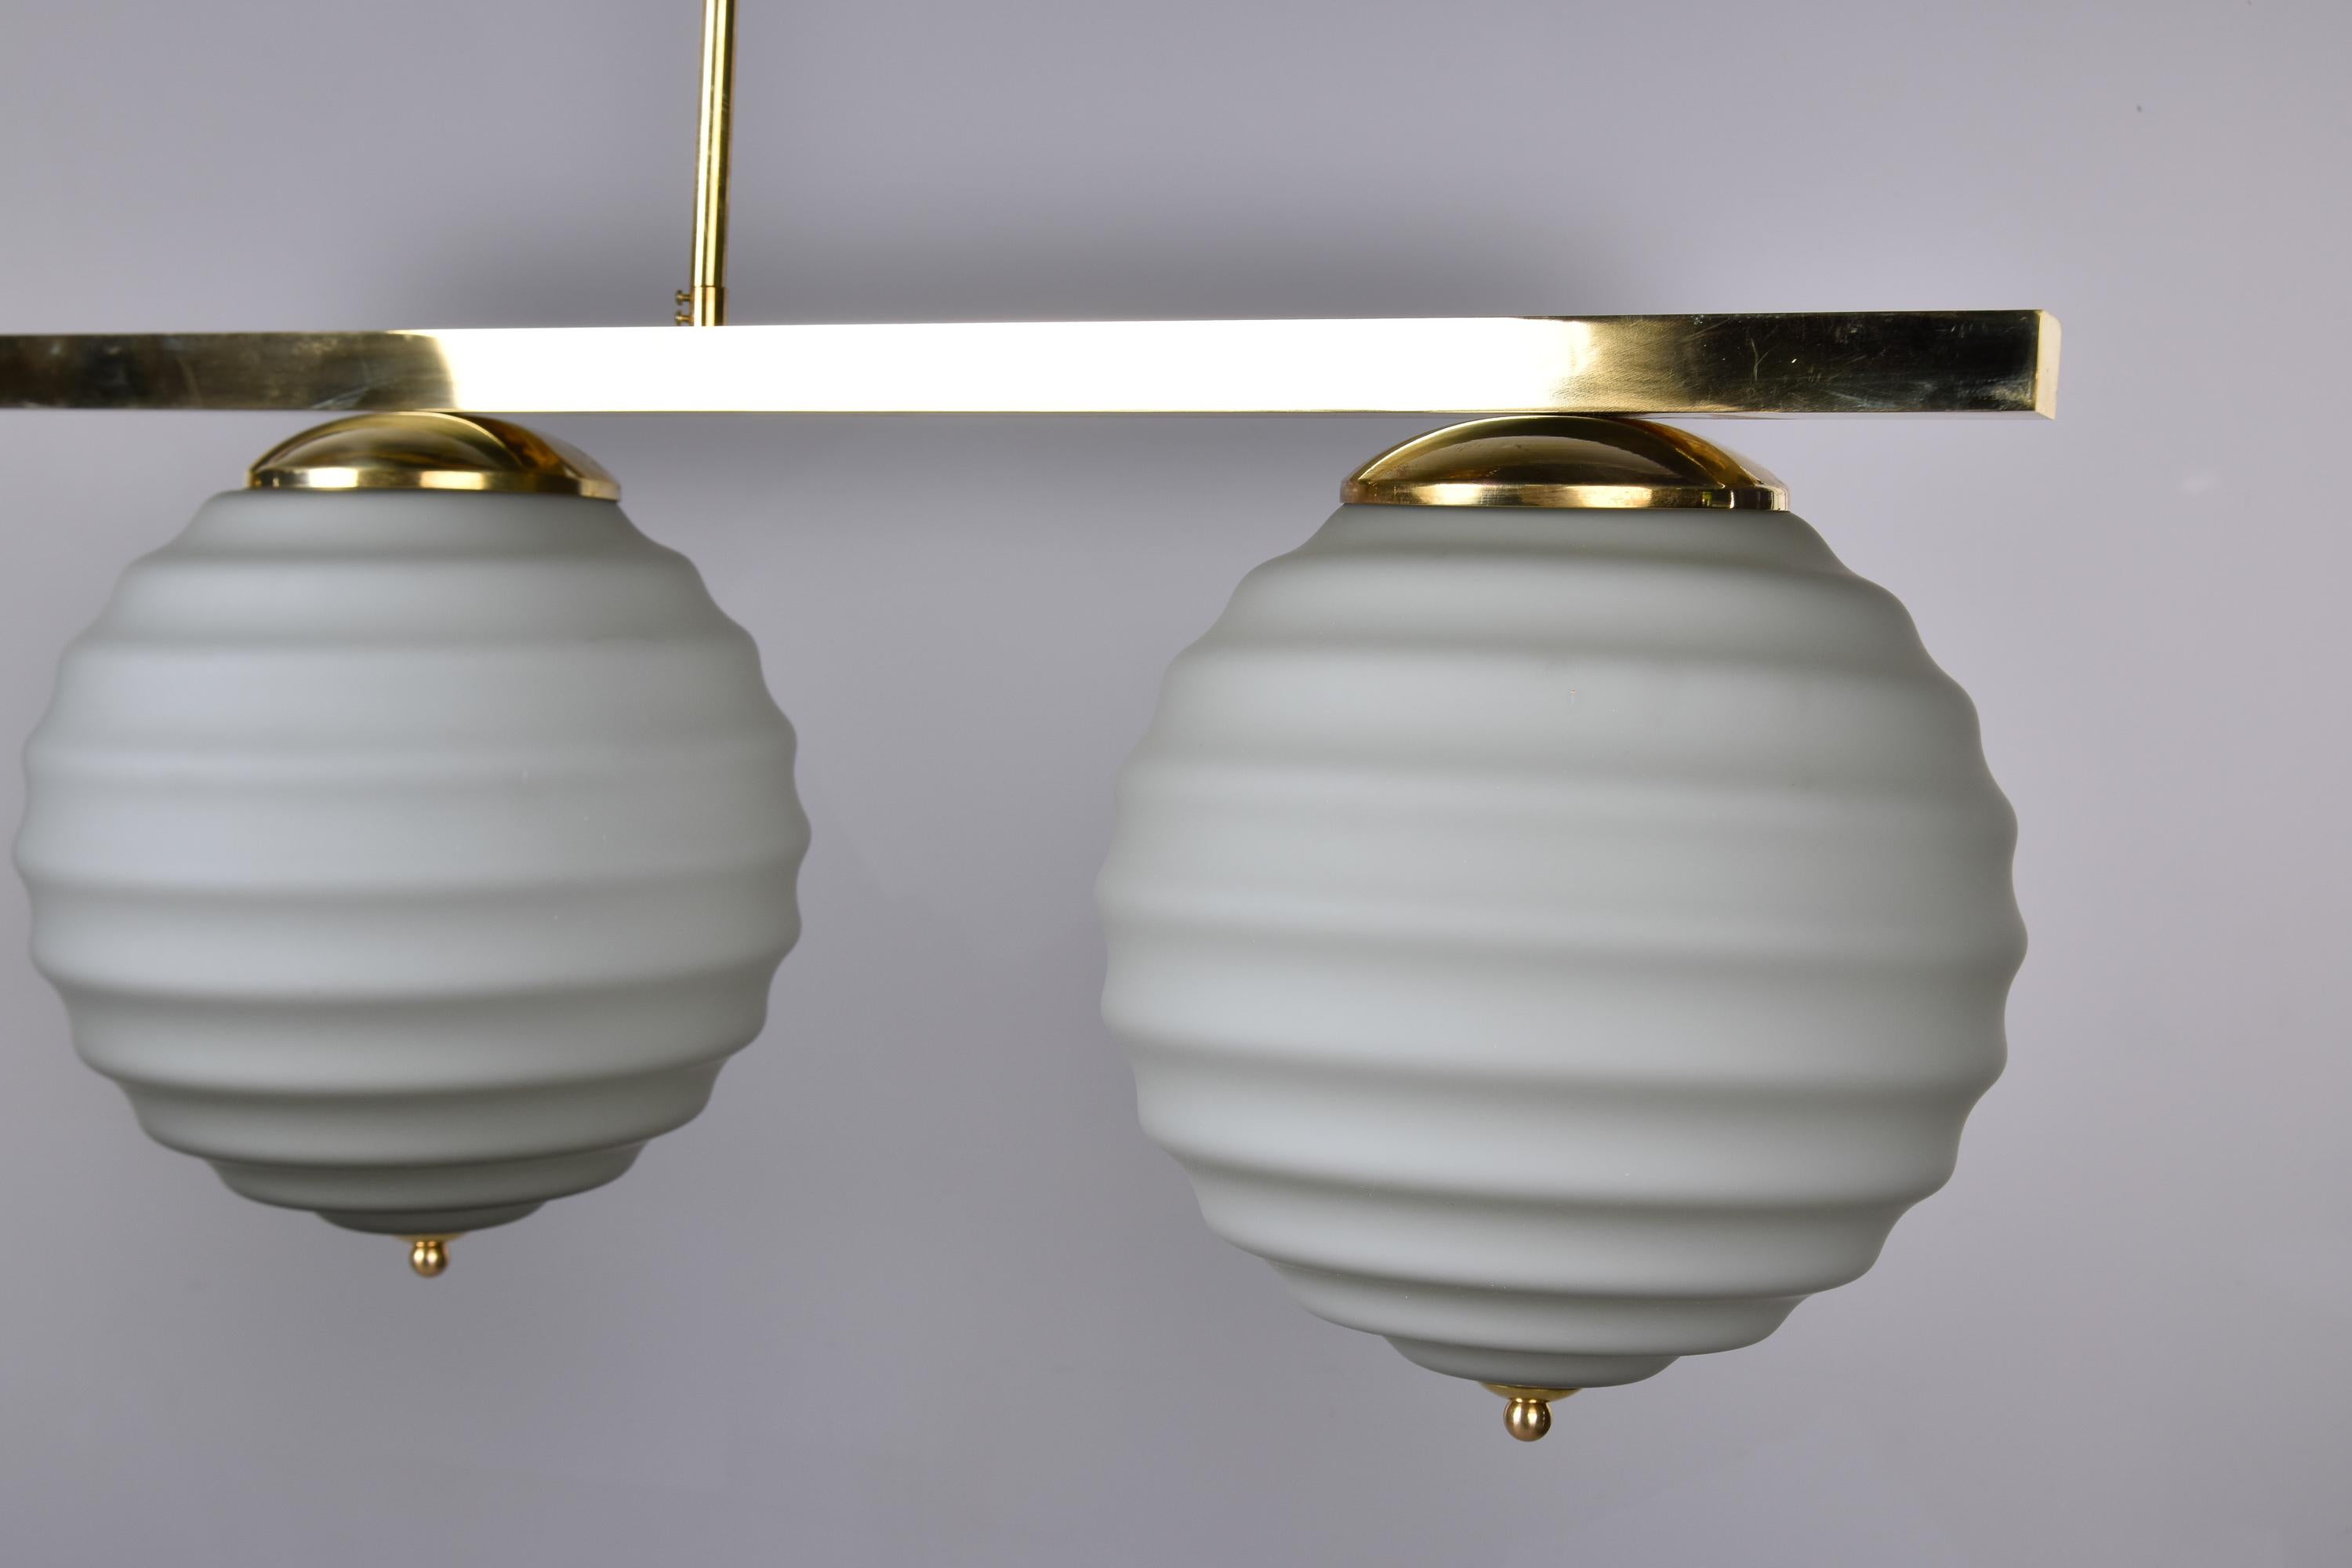 New Italian Fixture with Four Pale Taupe Globes on Horizontal Brass Bar For Sale 1